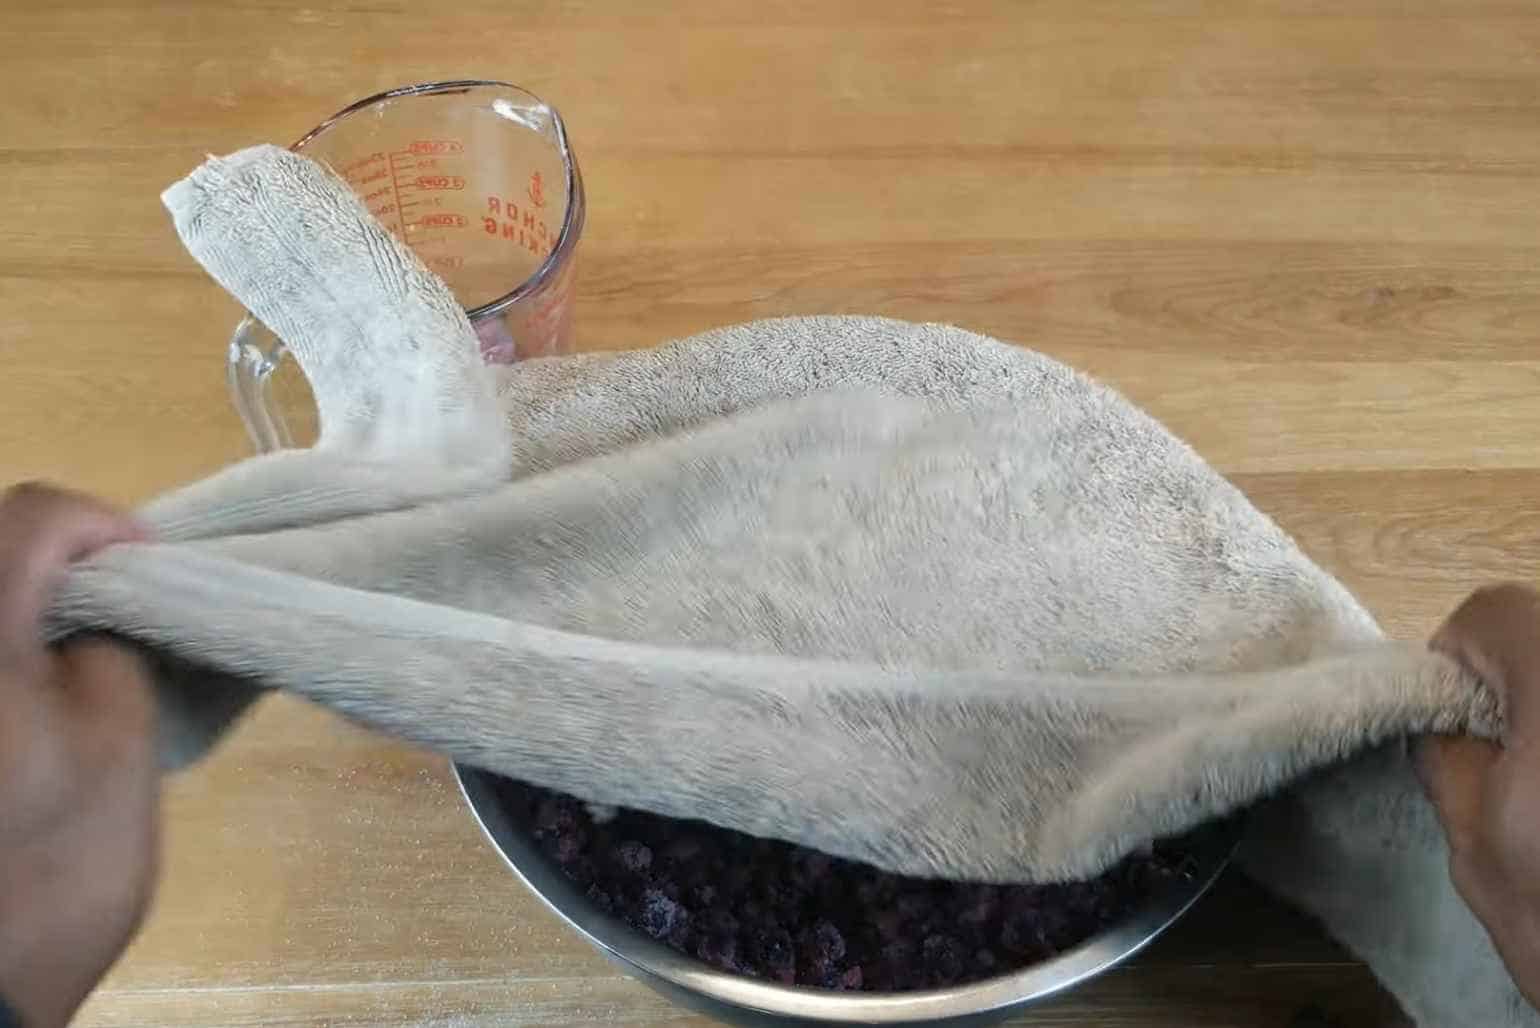 After doing so, cover the mixed sugar and blueberries with a piece of cloth and let it sit for a couple of hours to let the blueberries absorb the sugar well.